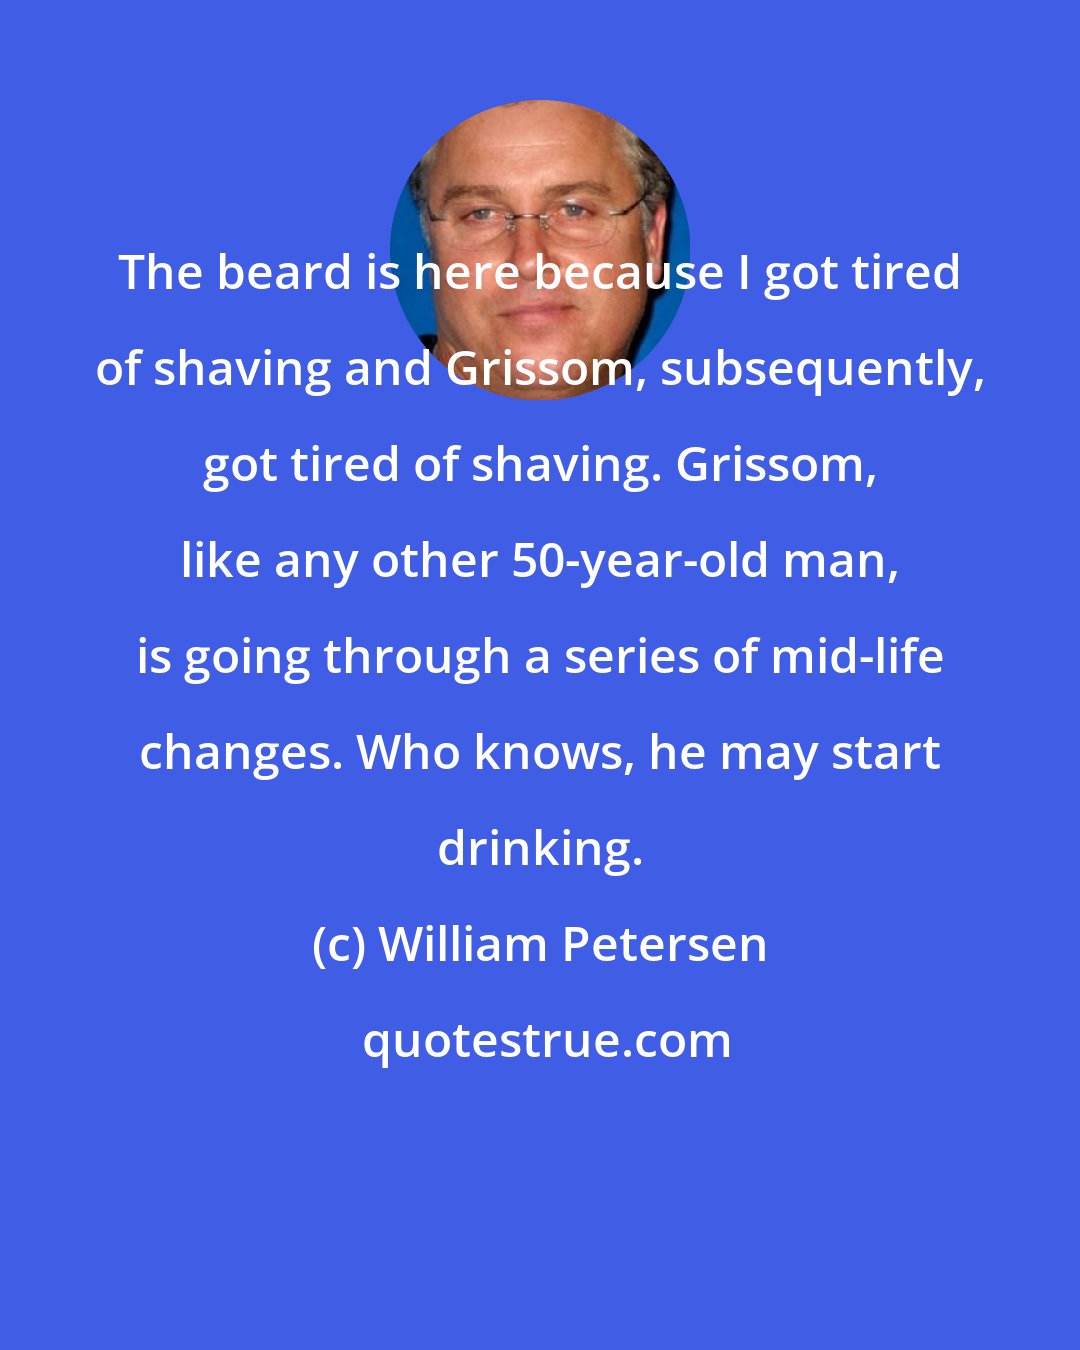 William Petersen: The beard is here because I got tired of shaving and Grissom, subsequently, got tired of shaving. Grissom, like any other 50-year-old man, is going through a series of mid-life changes. Who knows, he may start drinking.